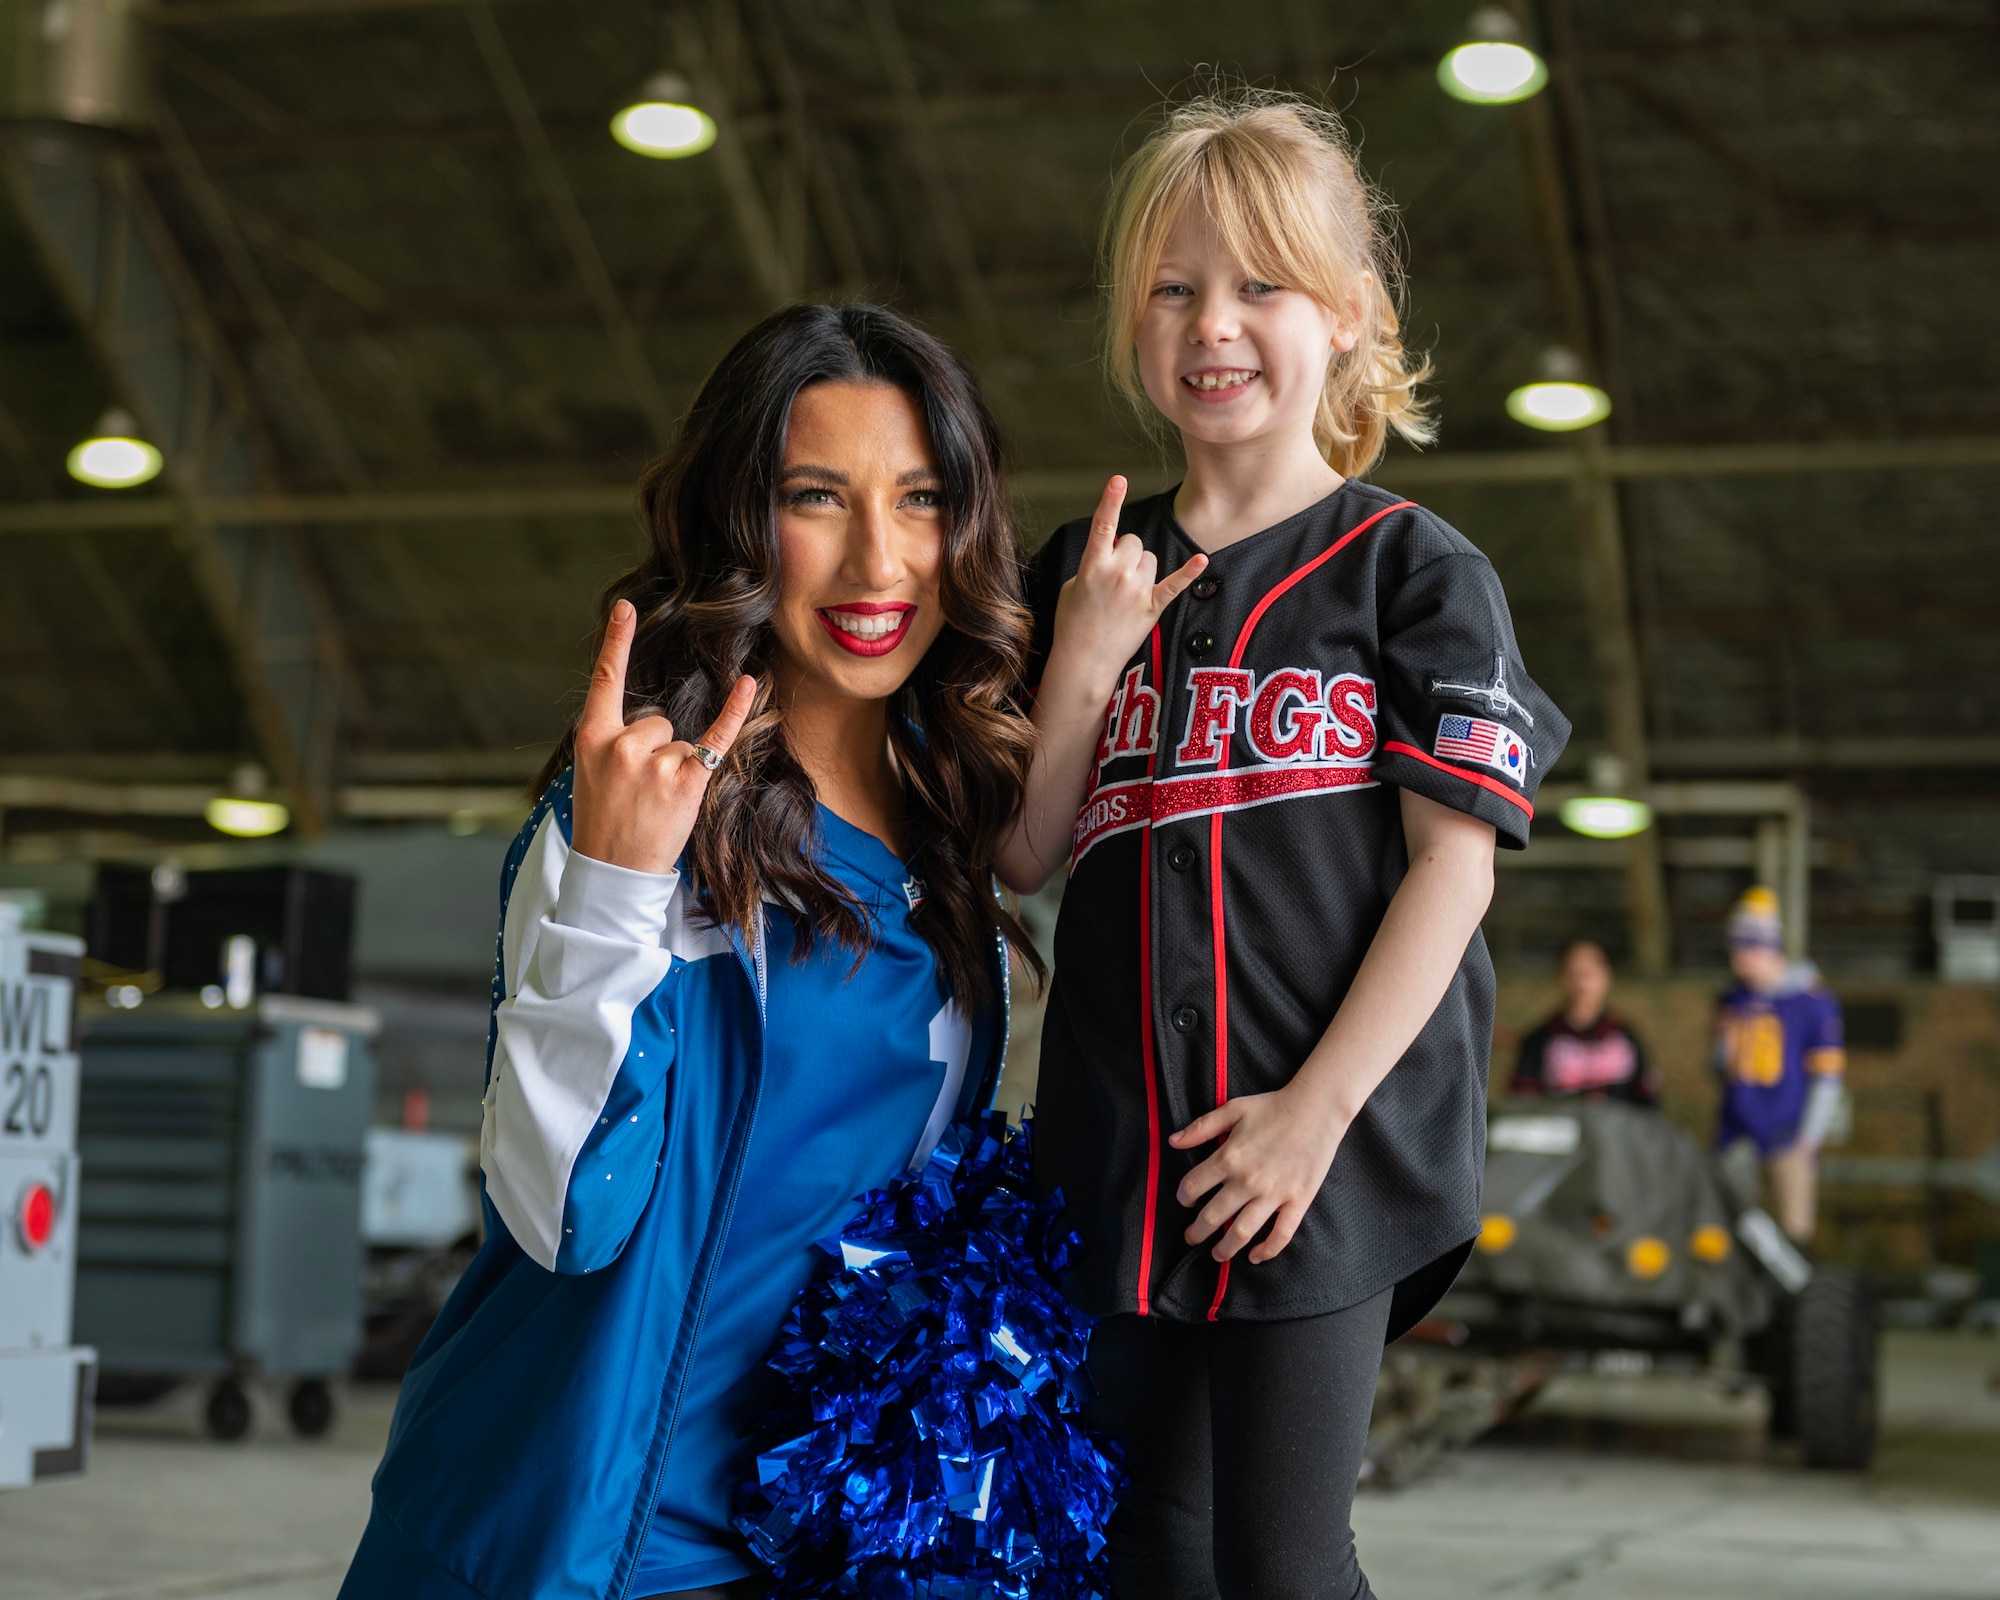 Kyleigh Creamer, an NFL cheerleader, takes a photo with a service member’s dependent from the 36th Fighter Generation Squadron, during the Pro Blitz 2024 unit visit at Osan Air Base, Republic of Korea, Feb. 10, 2024. The cheerleaders' visit was part of the NFL tour sponsored by the Armed Forces Entertainment. (U.S. Air Force photo by Staff Sgt. Aubree Owens)